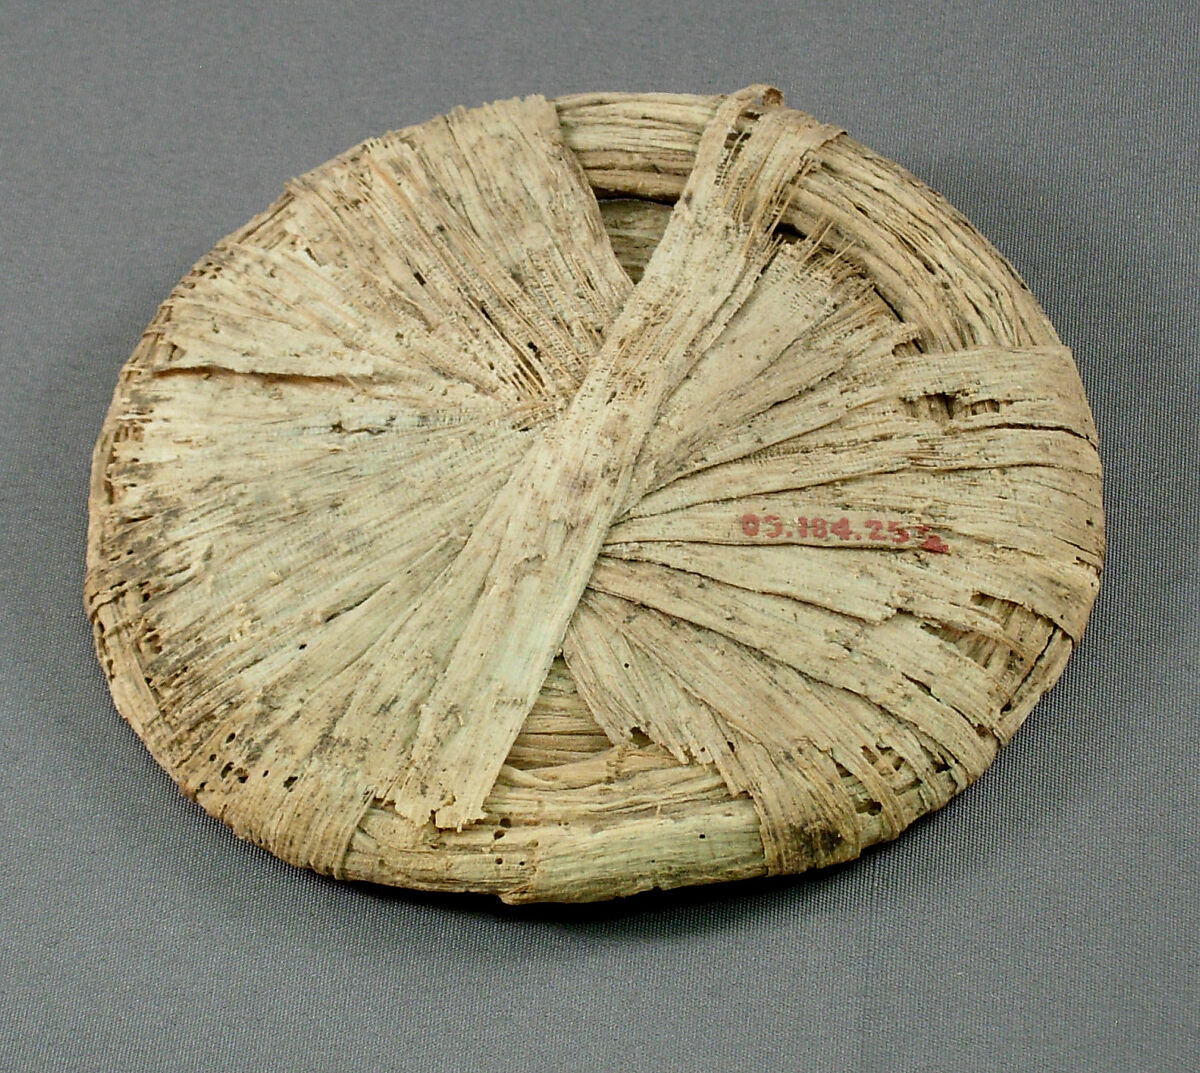 Papyrus Lid from Tutankhamun's Embalming Cache, Papyrus 